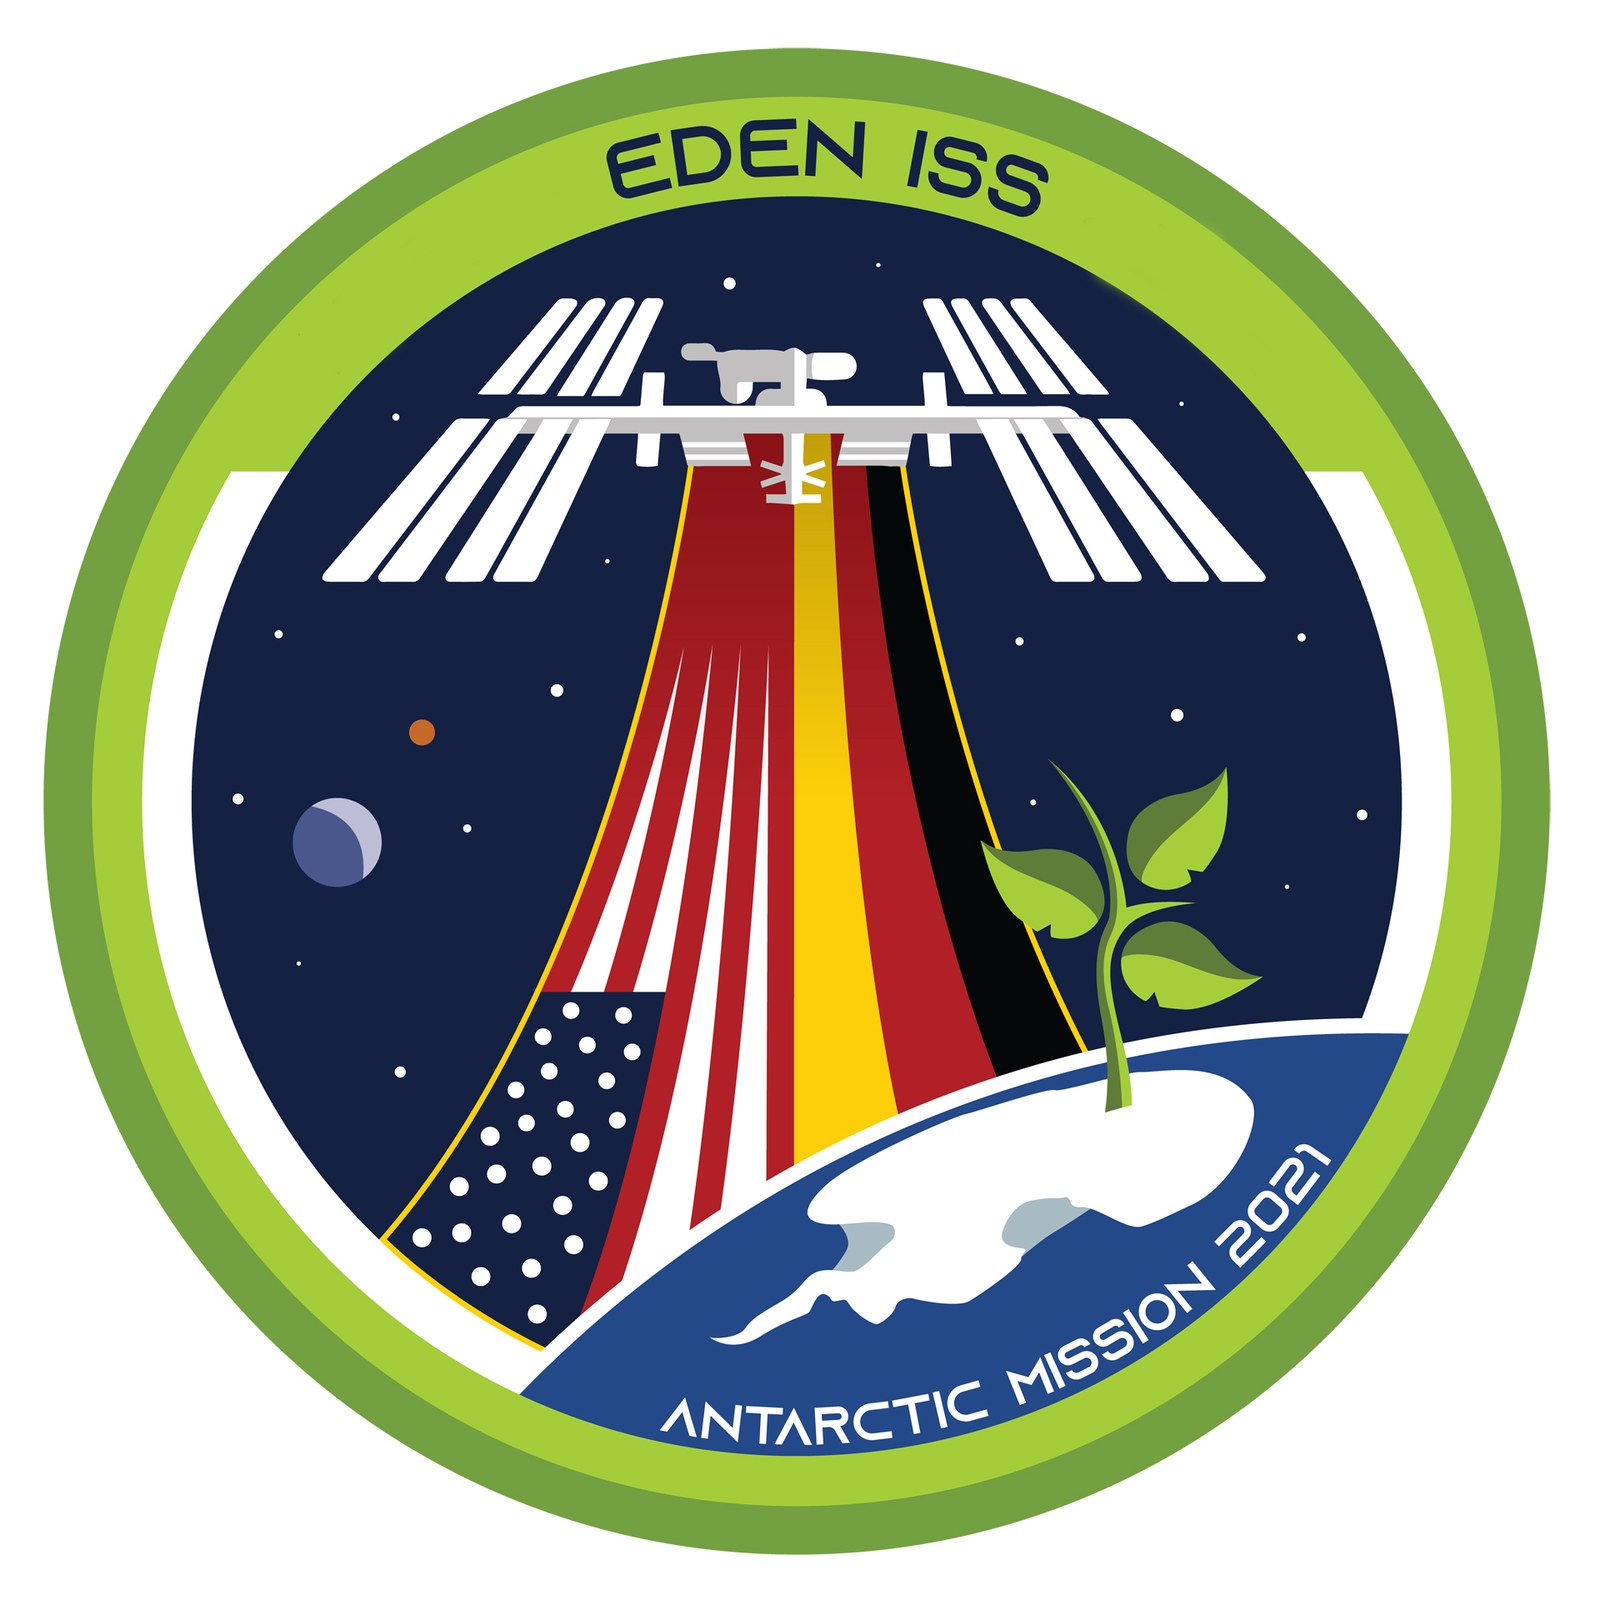 Mission logo for the 2021 EDEN ISS mission